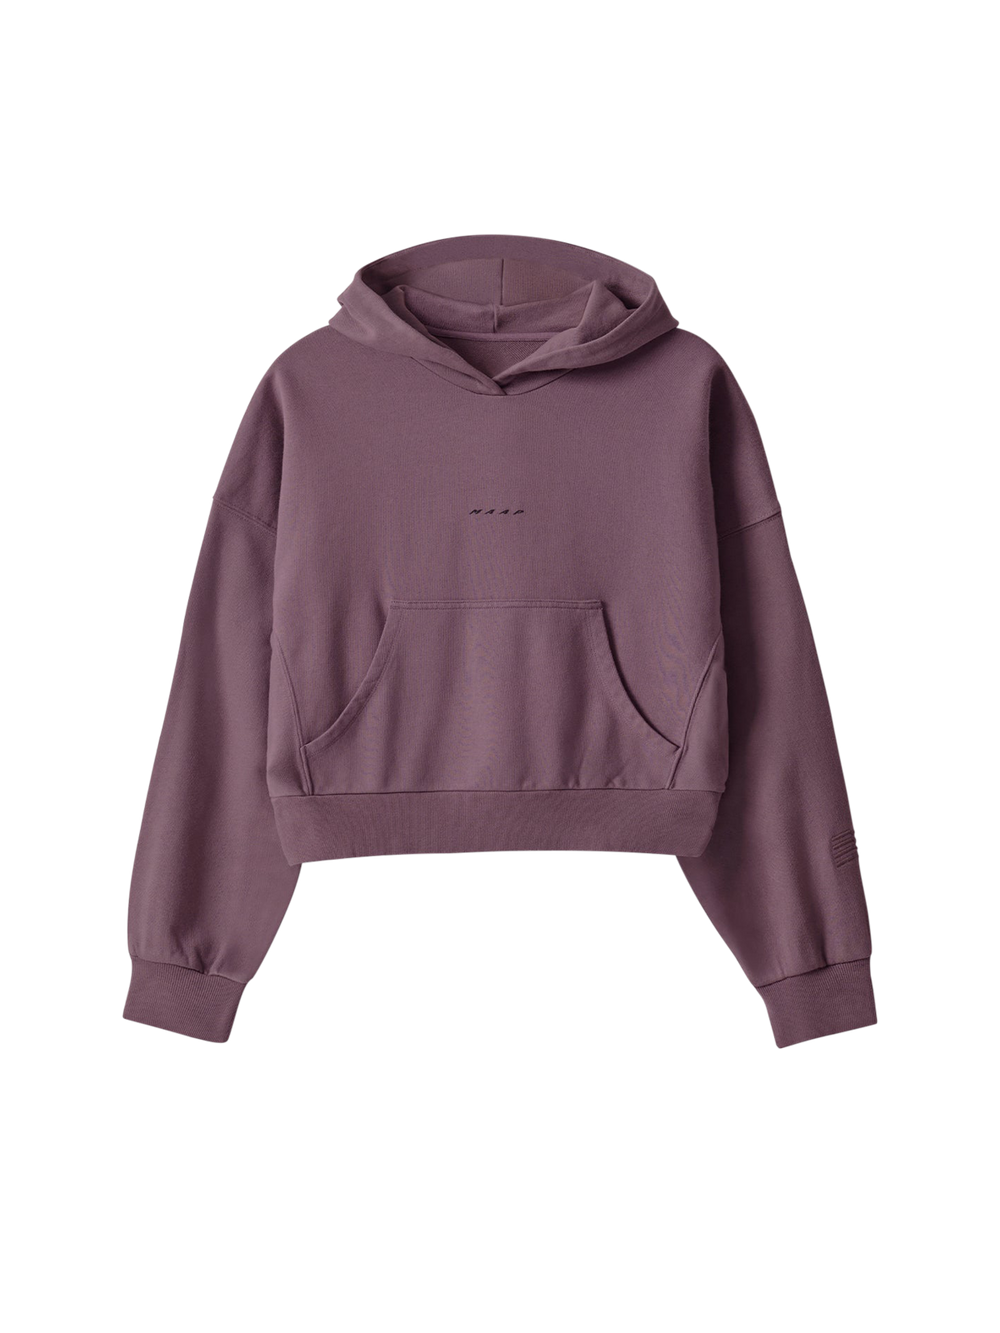 Product Image for Women's Evade Hoodie